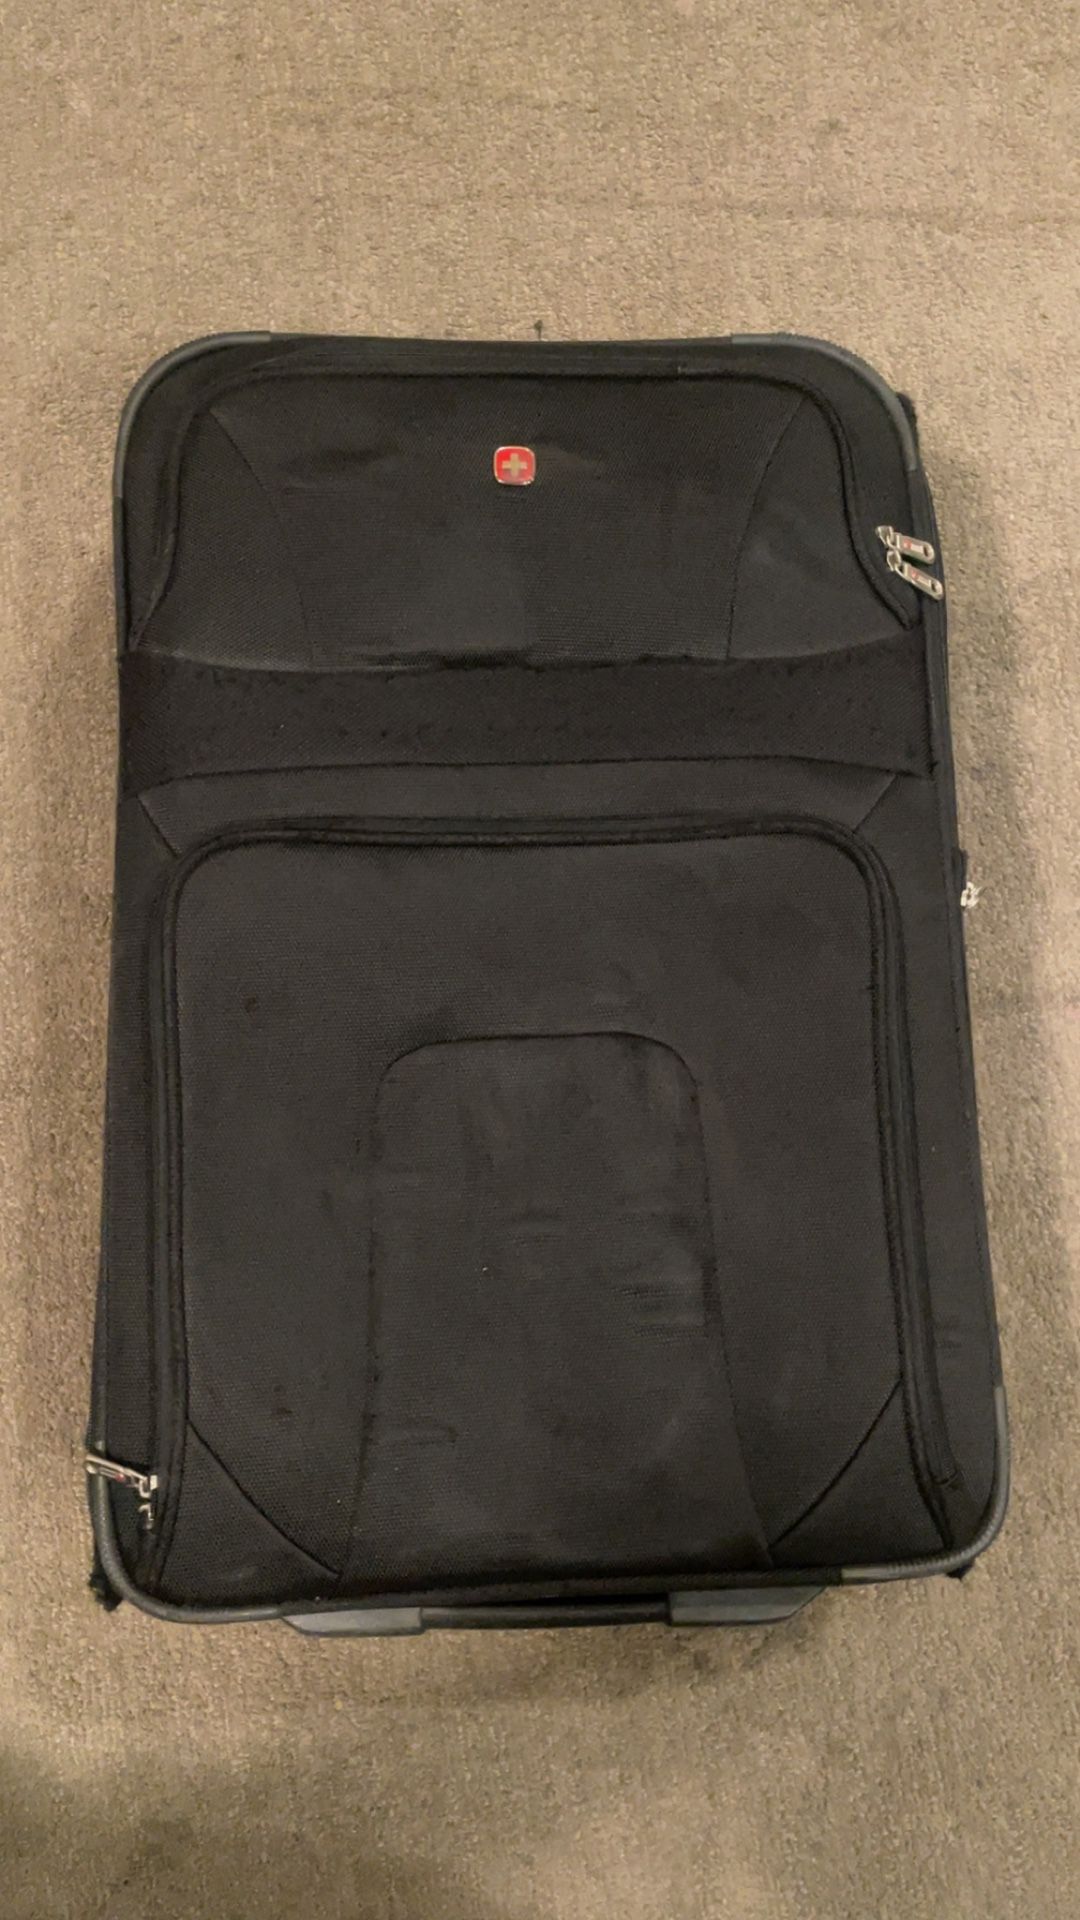 Suit Cases For Traveling